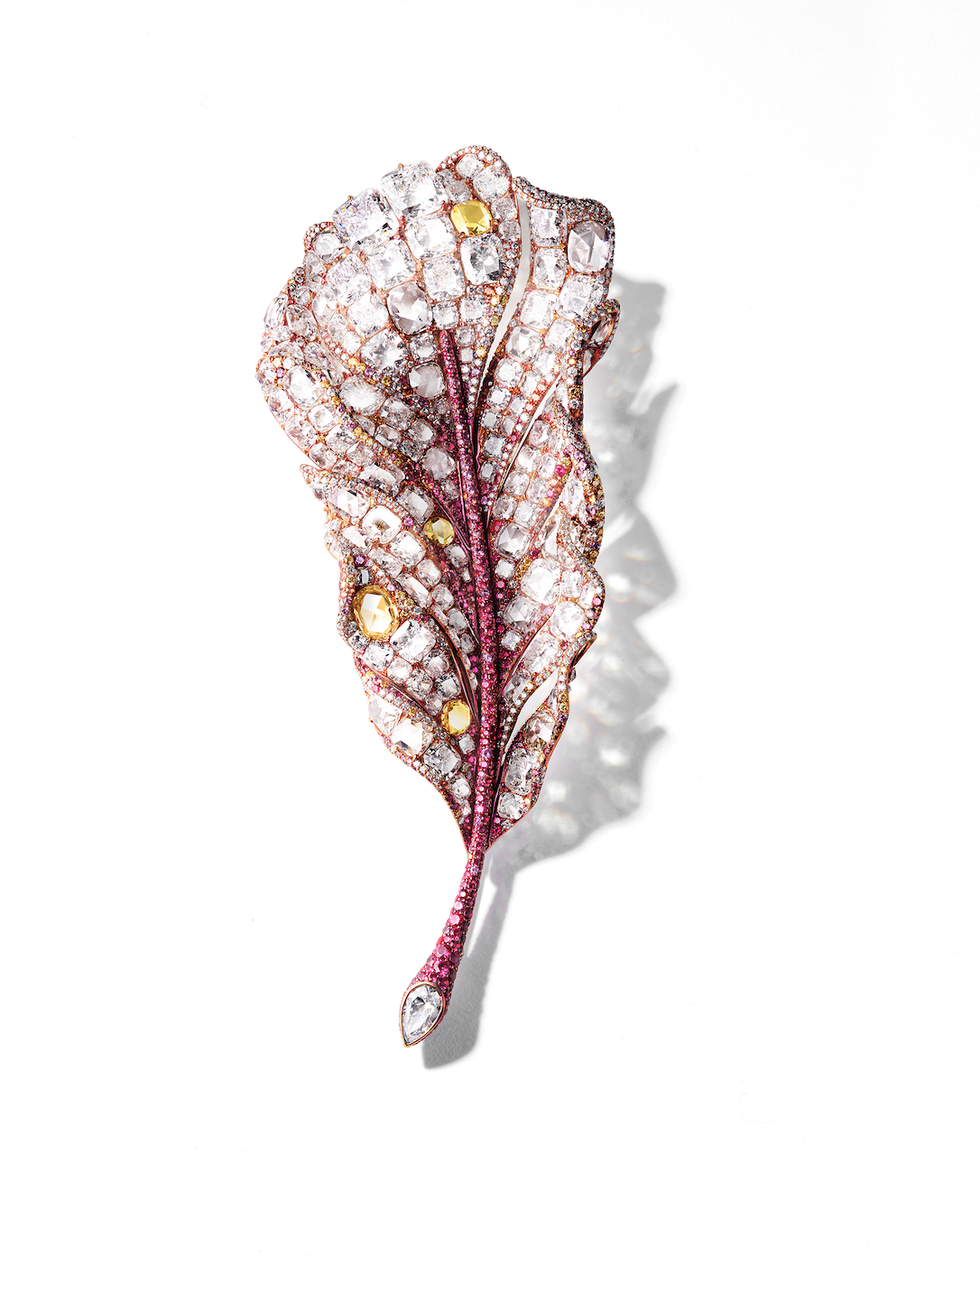 8 Extraordinary Jewelry Creations from the Latest Paris Haute